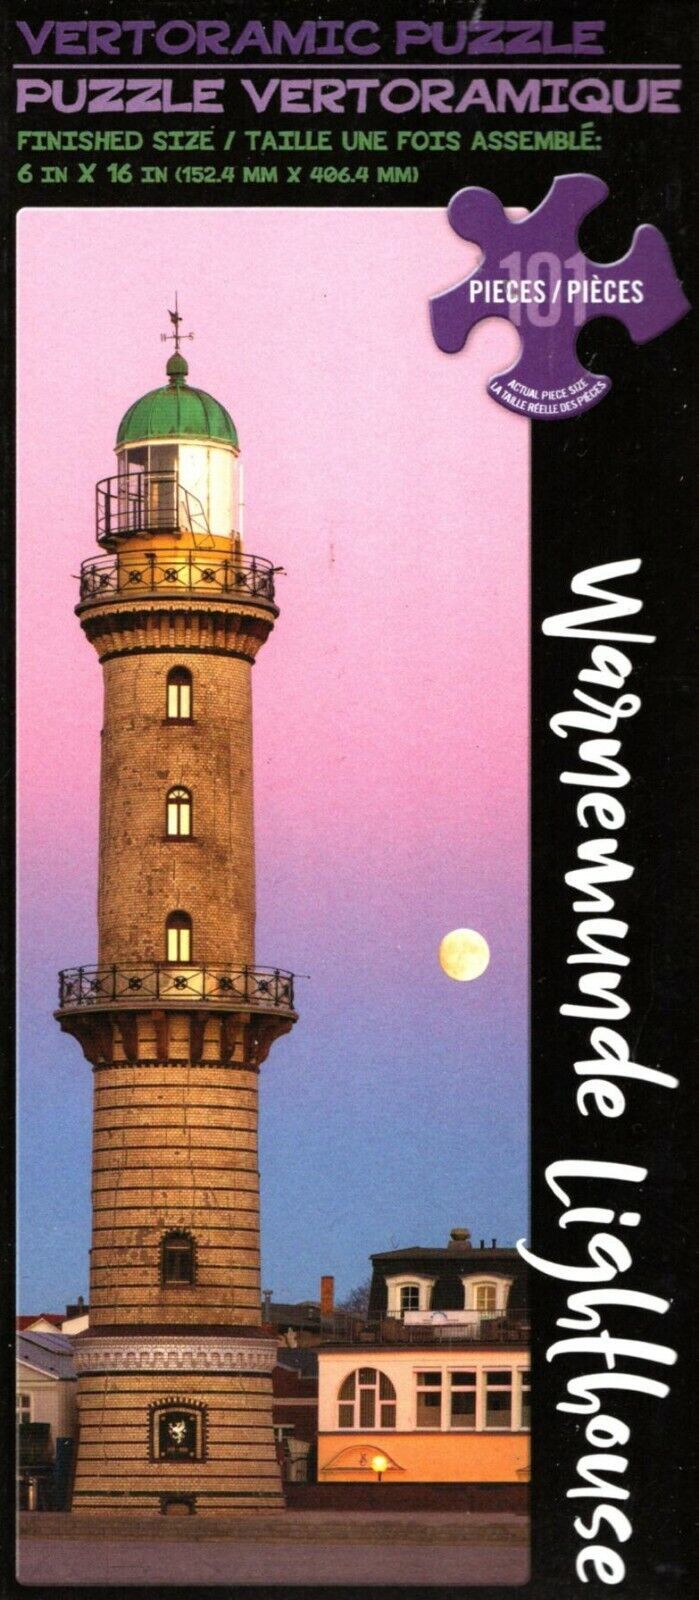 Primary image for Vertoramic Puzzle - Warnemunde Lighthouse - 101 Pieces Jigsaw Puzzle